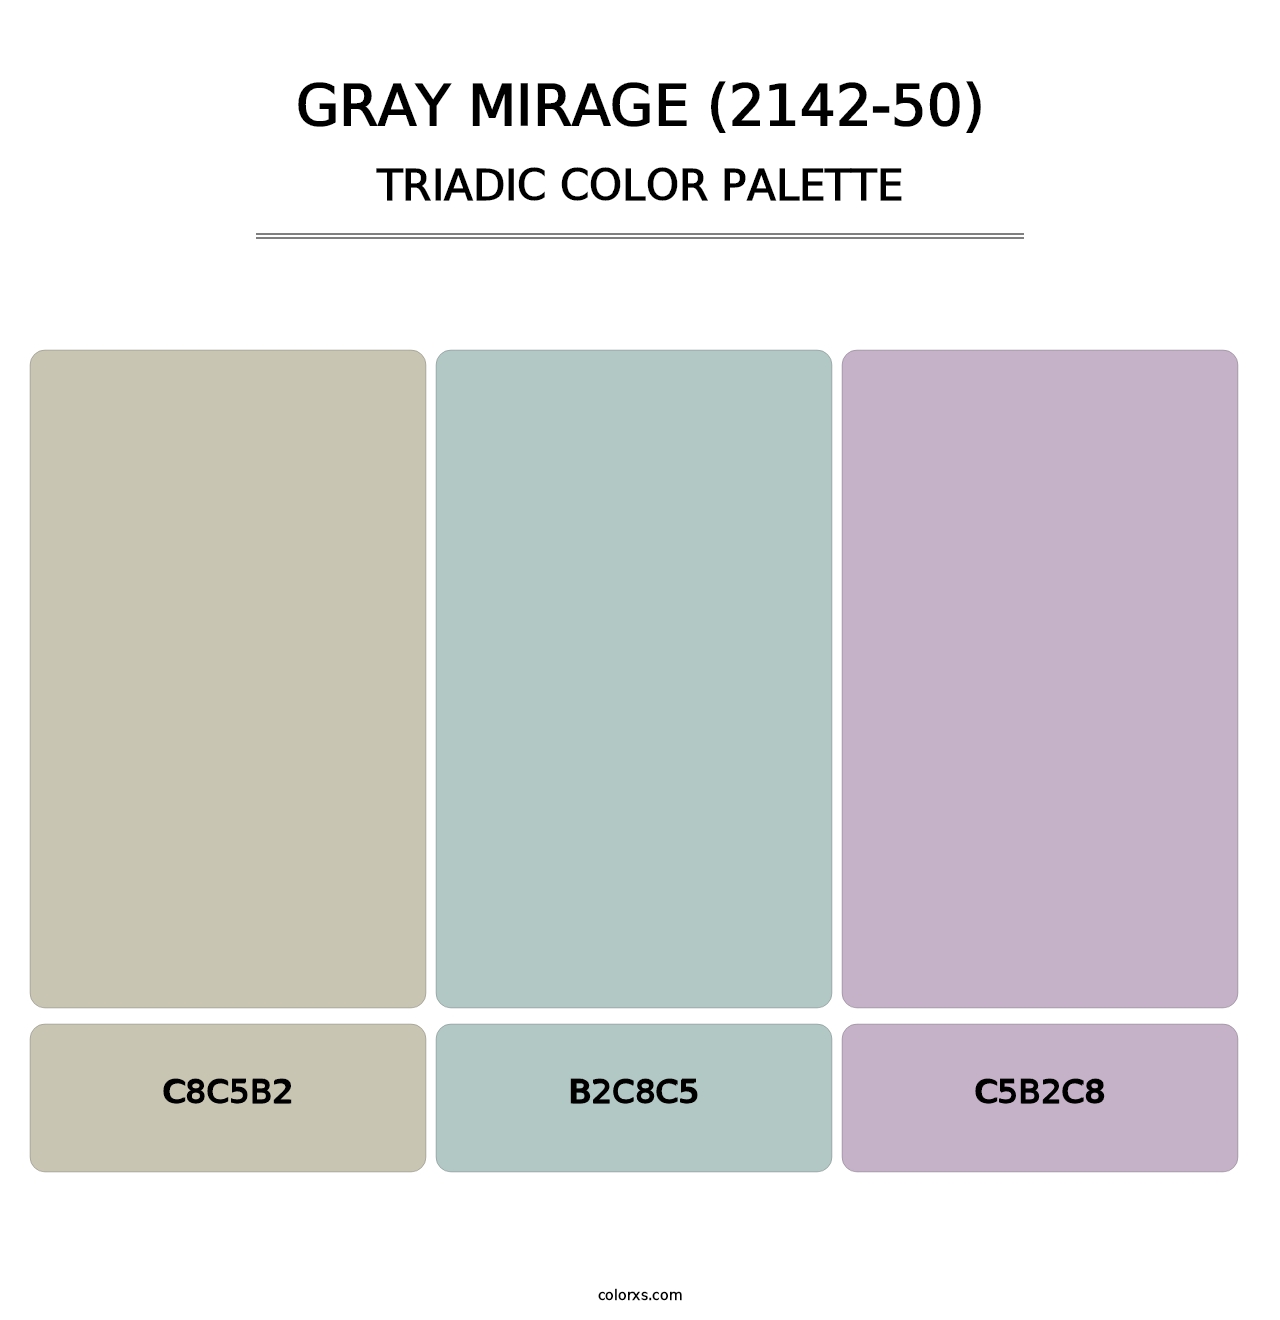 Gray Mirage (2142-50) - Triadic Color Palette